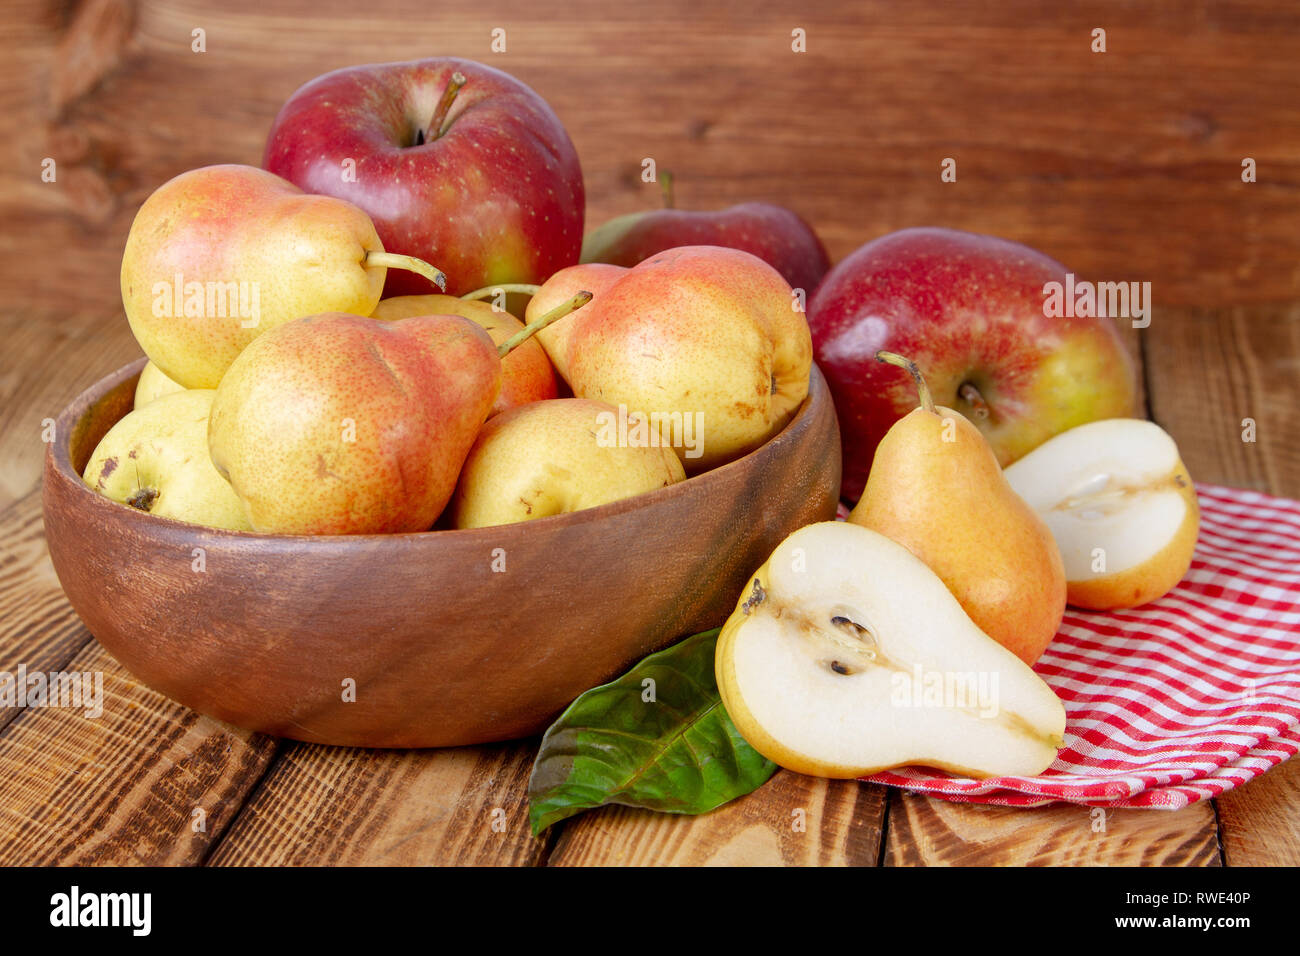 Red Apple Pear Bowl Cup Red Napkin Old Rustic Wooden Stock Photo